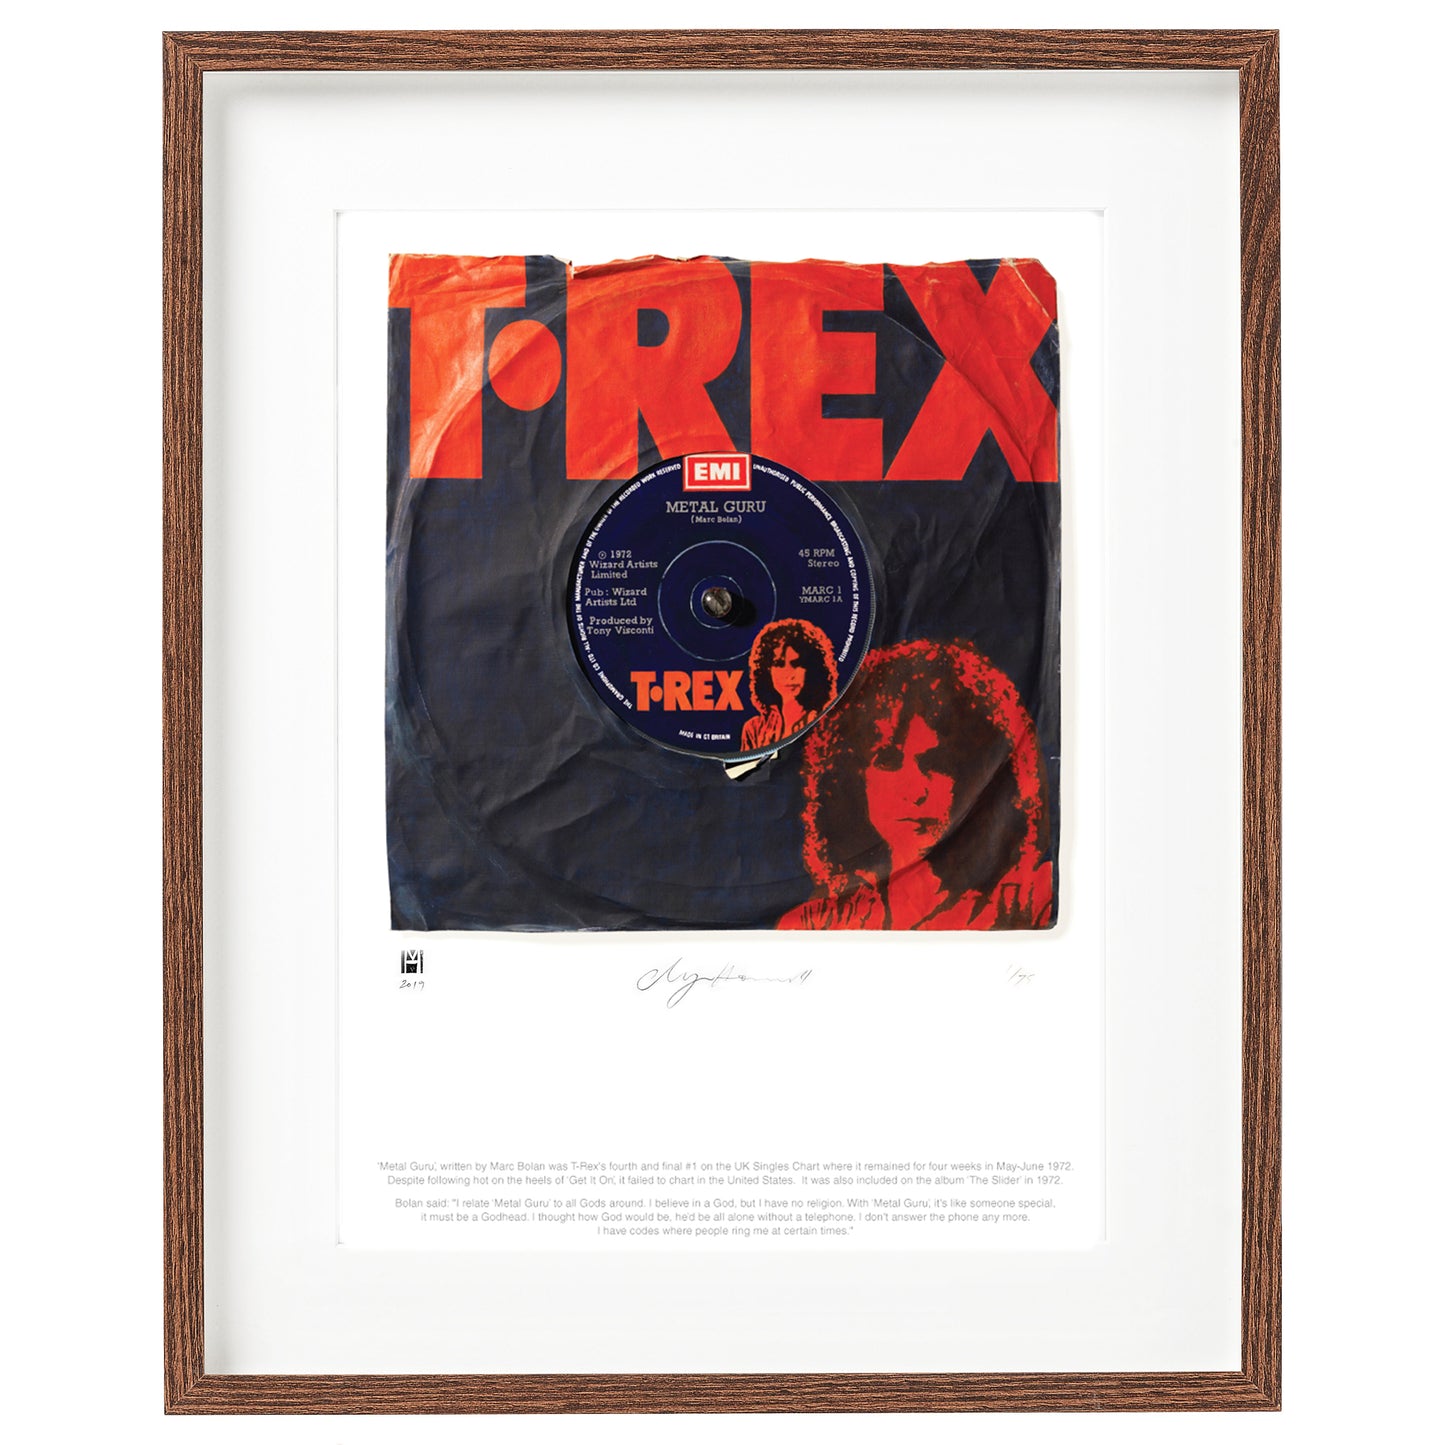 Metal Guru'' by T-Rex Limited Edition Poster Prints of Original Painting